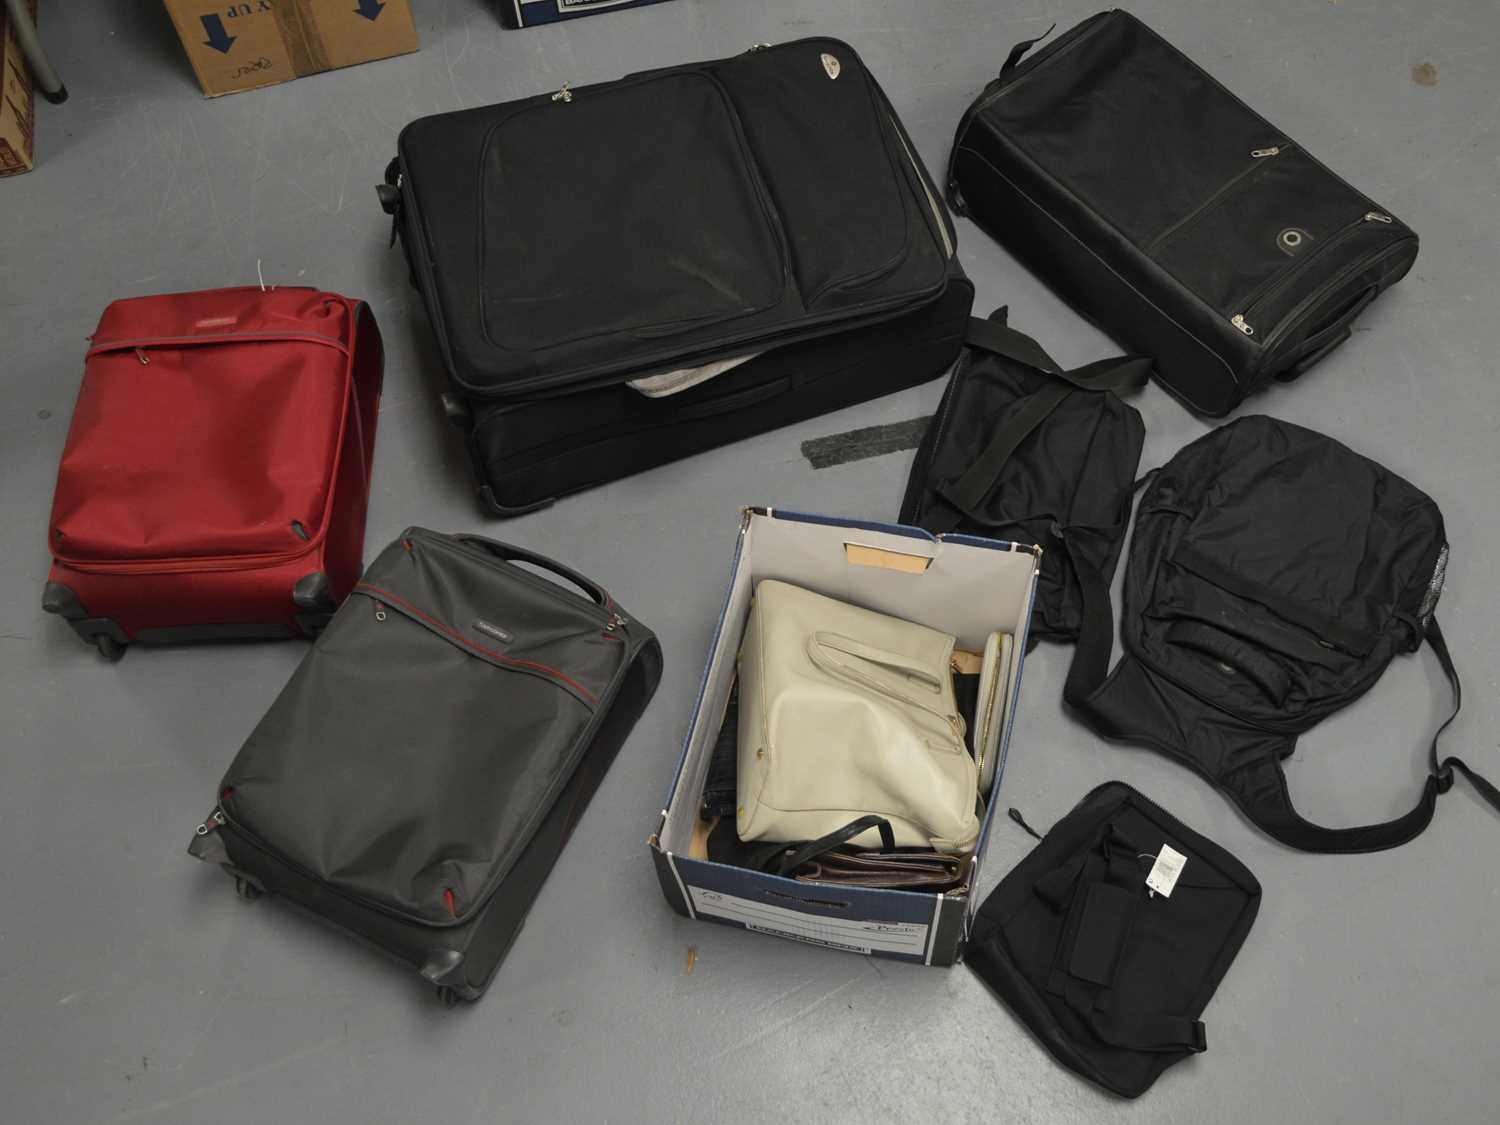 Samsonite cabin cases, large case; and various handbags and purses.